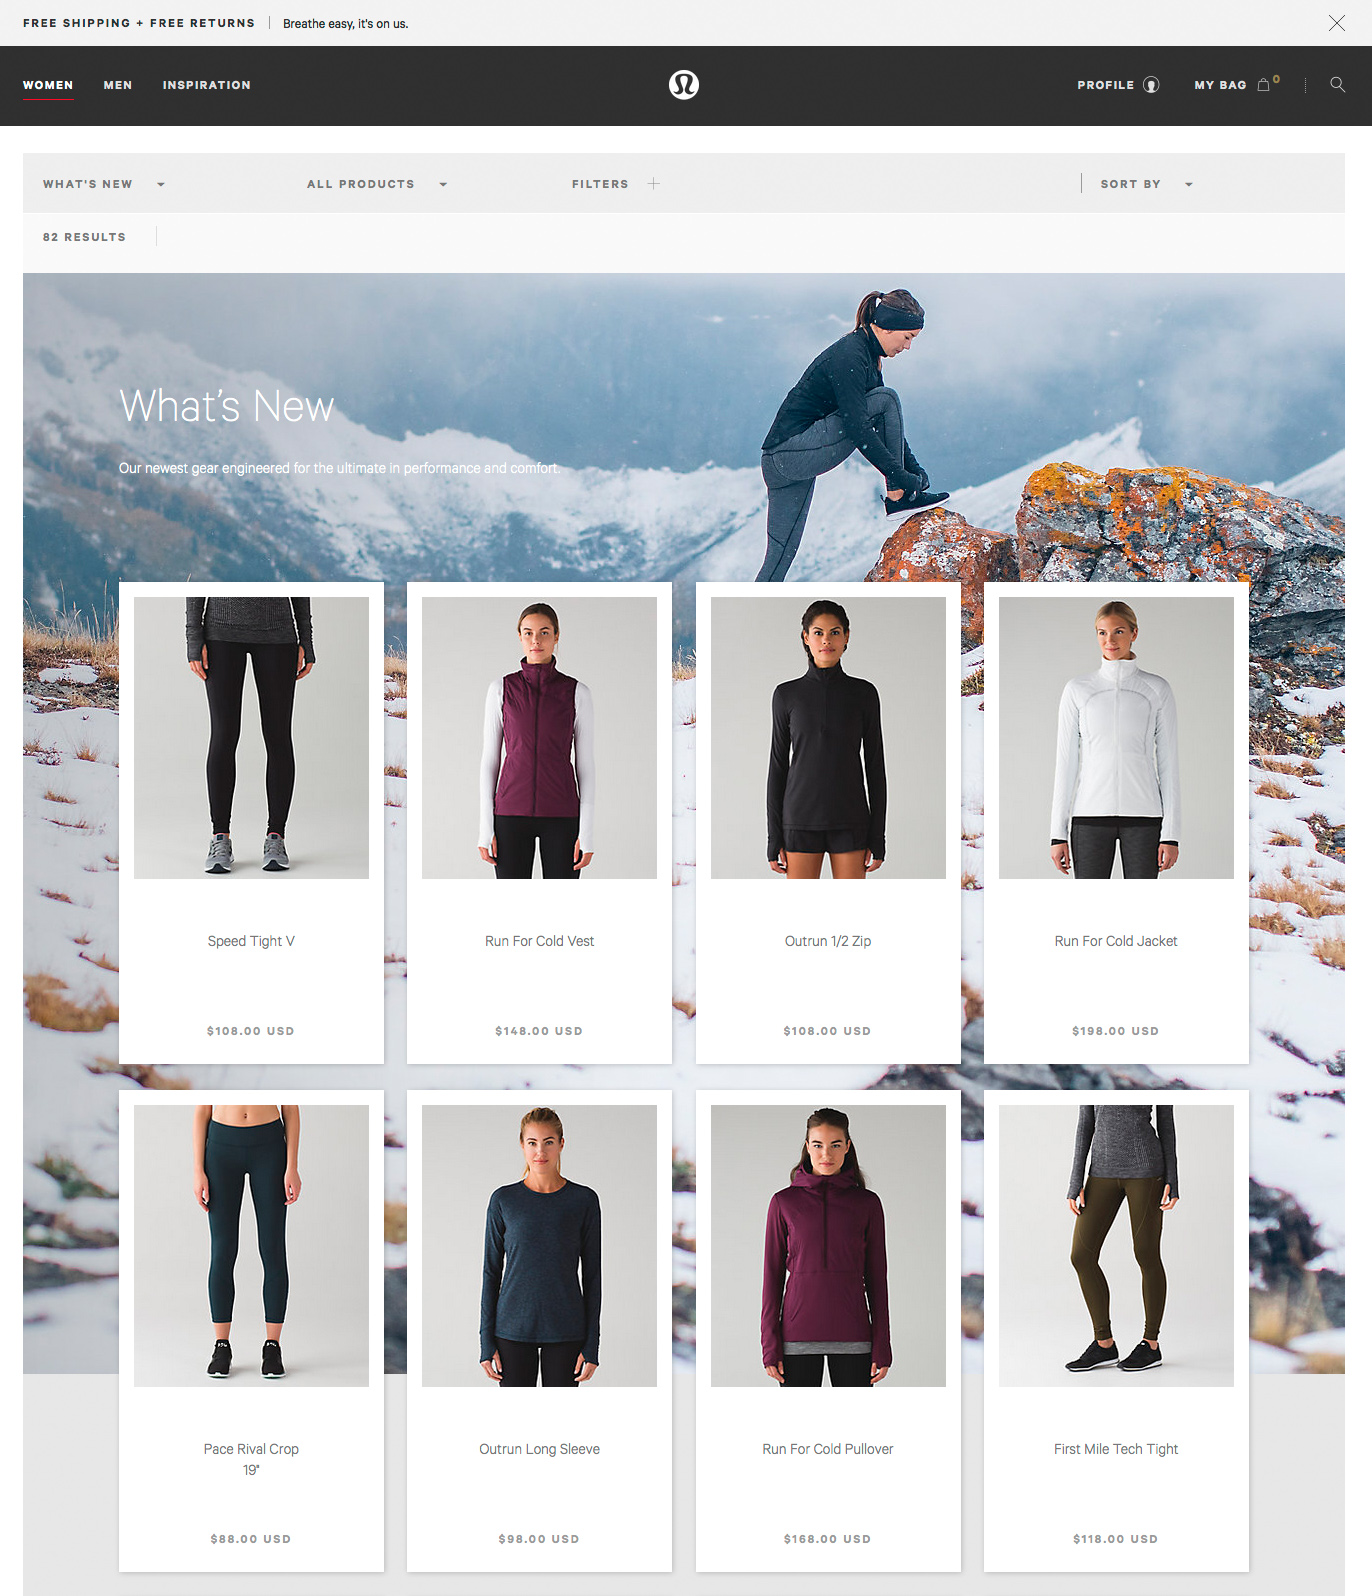 lululemon_running_campaign_photography_cold_mountains_image_27.jpg